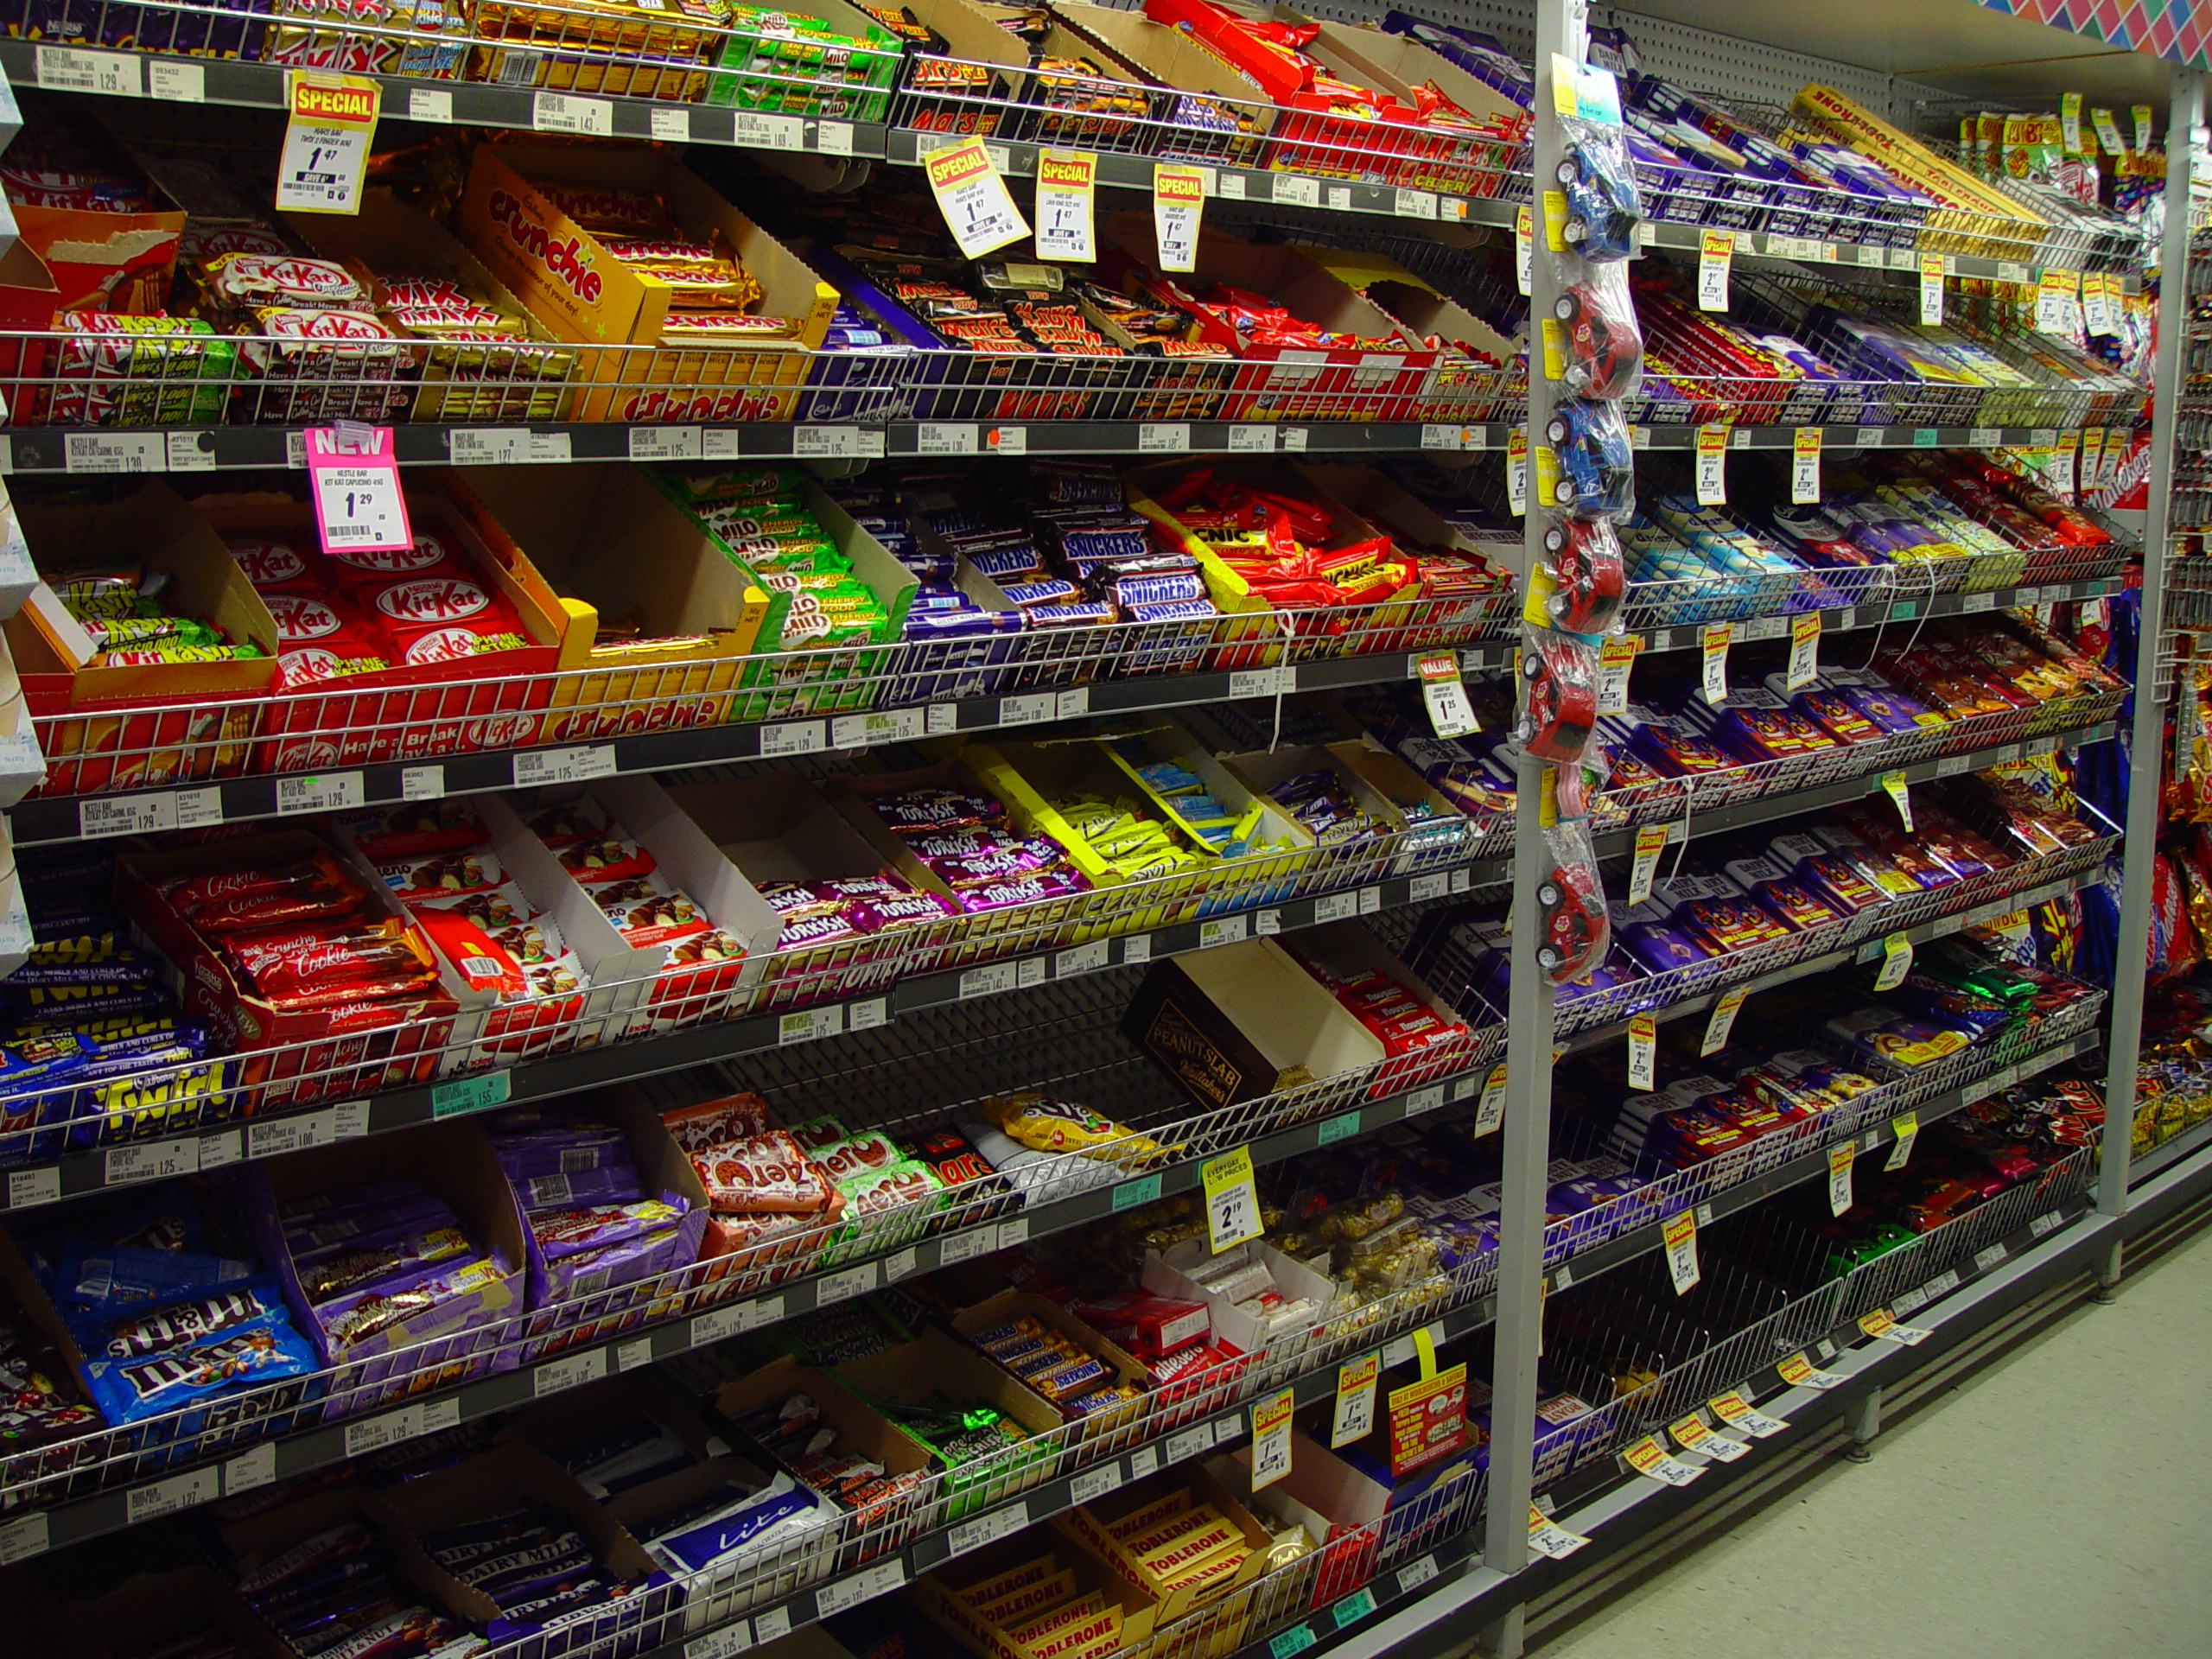 shelf, food, candy bar, candy, chocolate, colorful, colors, shop, sweets